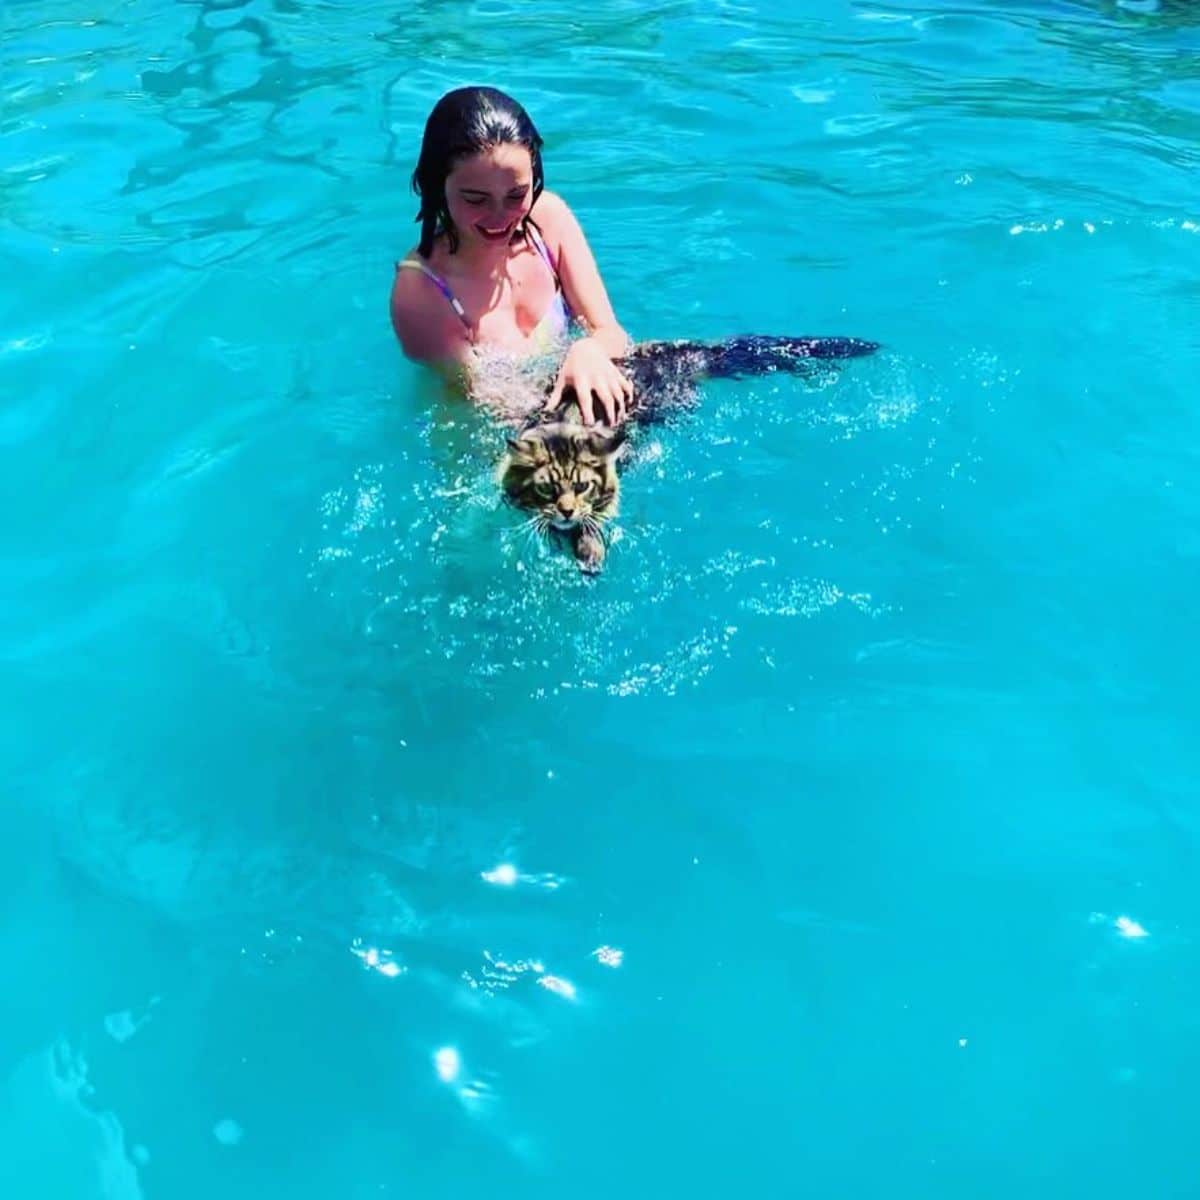 A tabby maine coon and a young woman swimming in a pool.